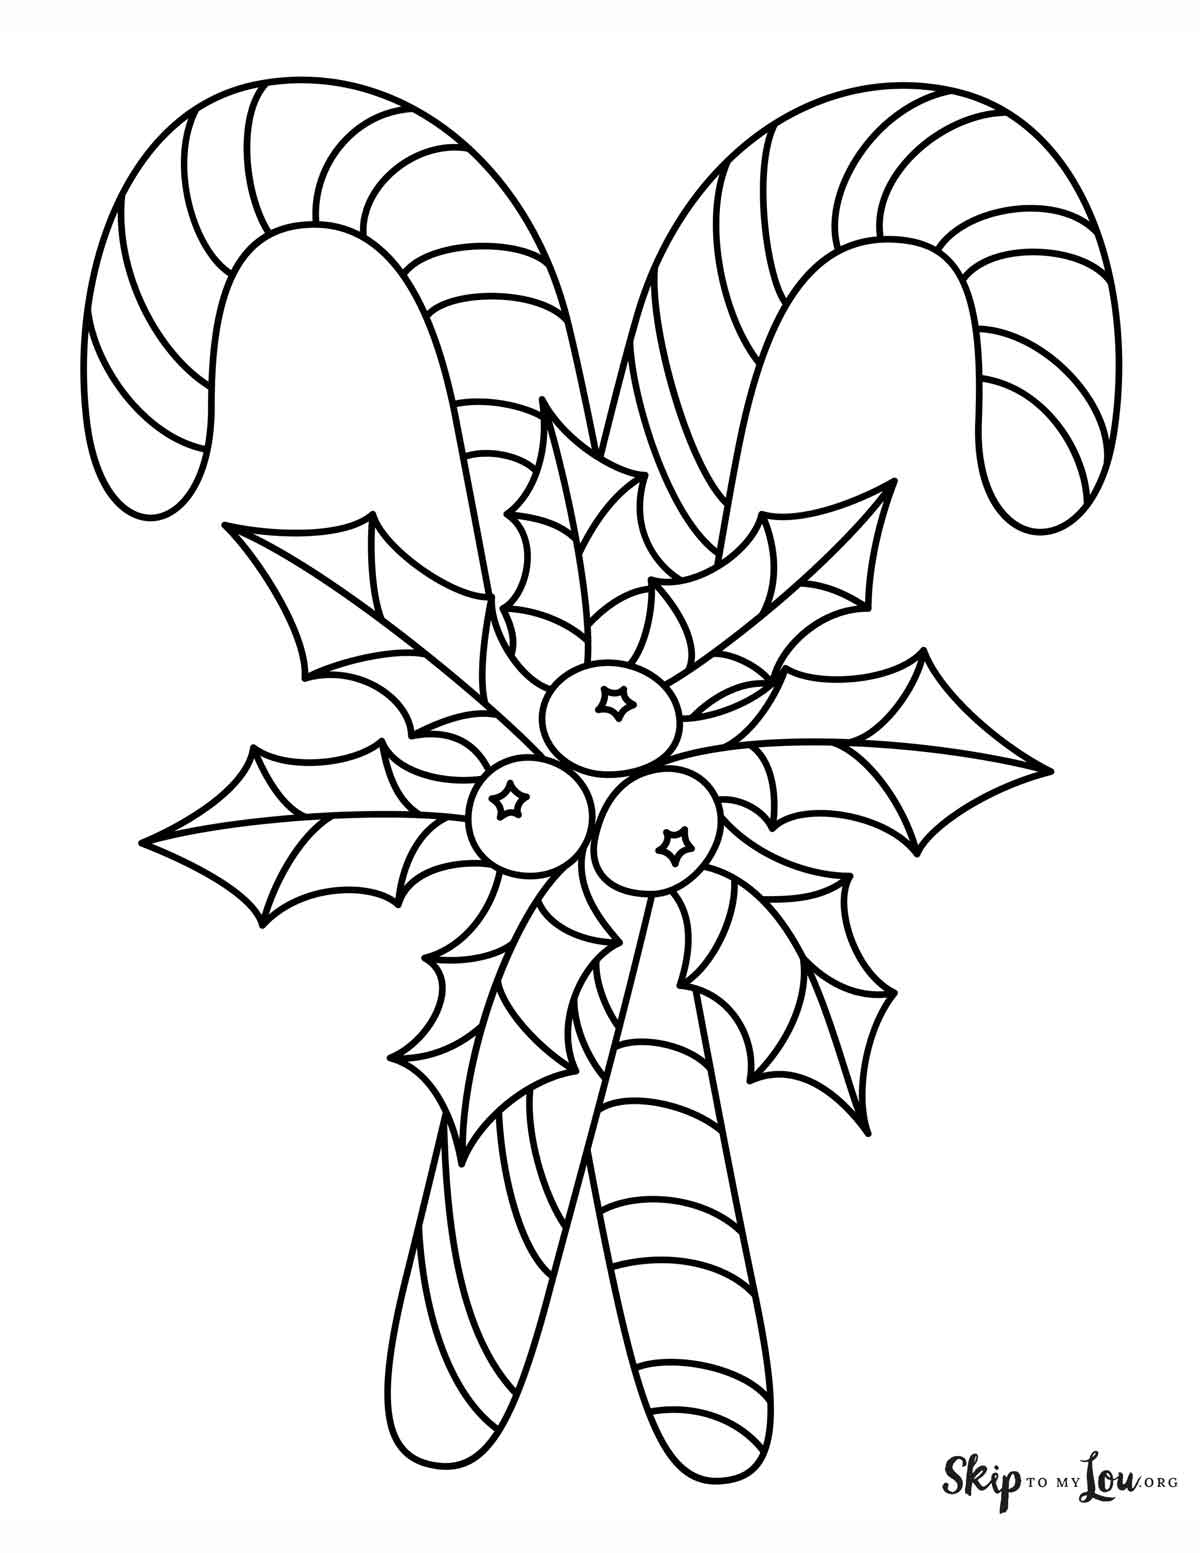 Candy cane coloring pages skip to my lou